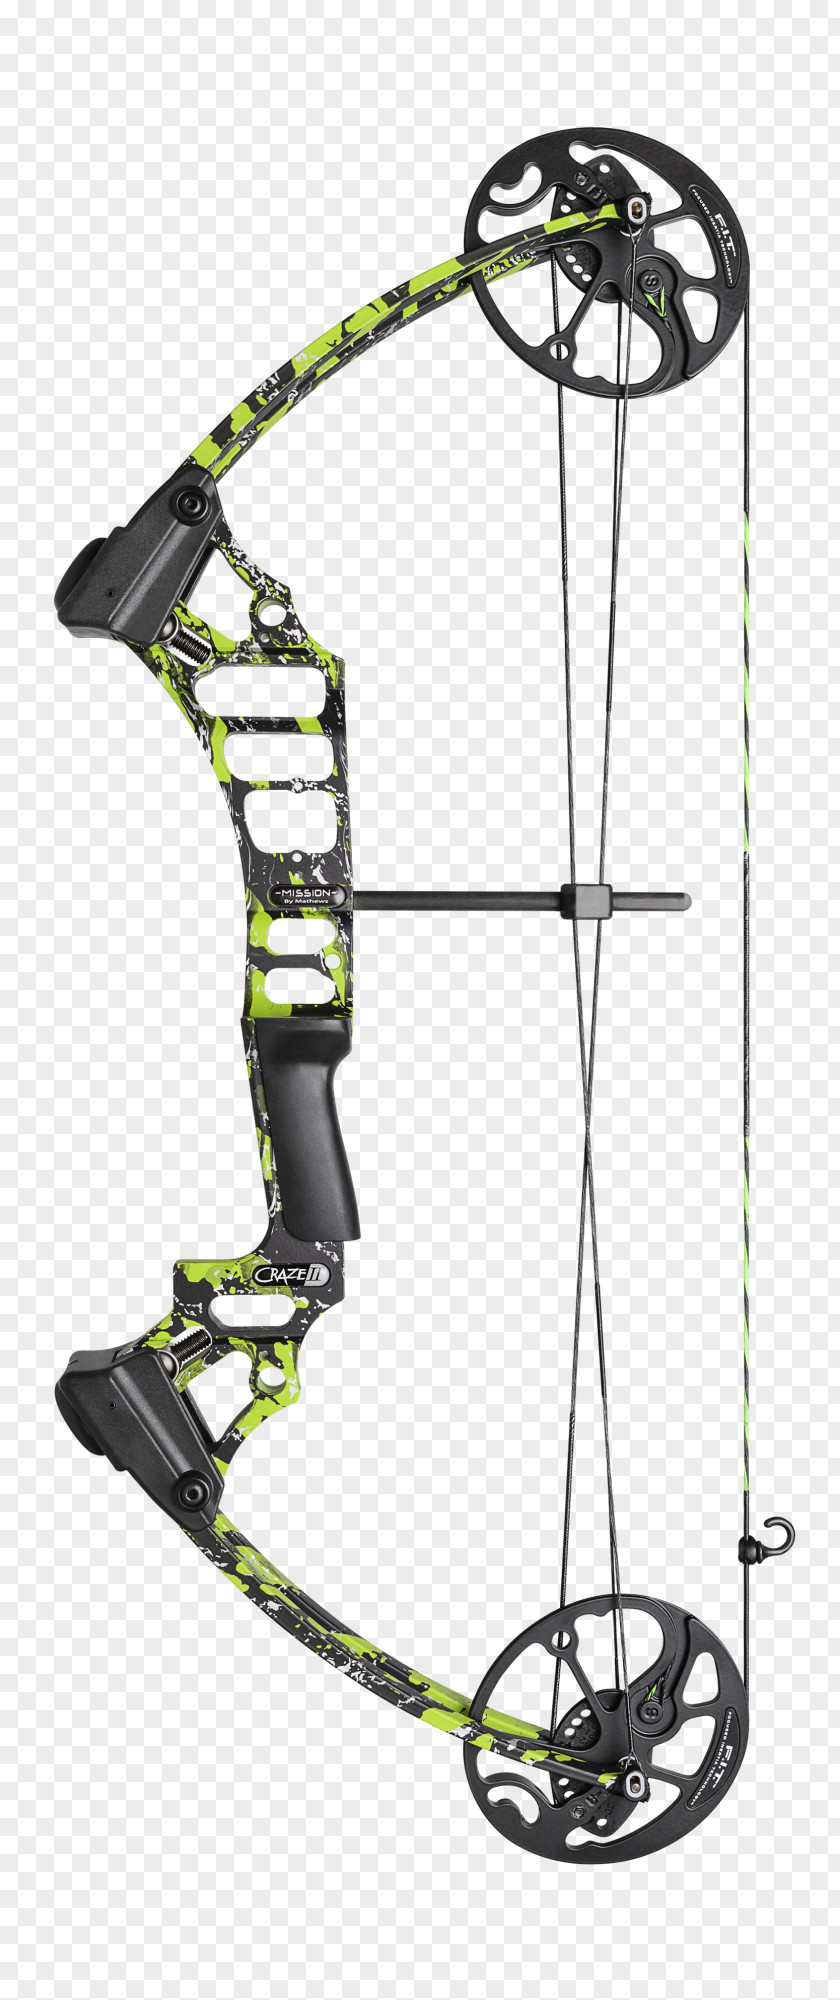 Web Shop Compound Bows Bow And Arrow Archery Bowhunting PNG